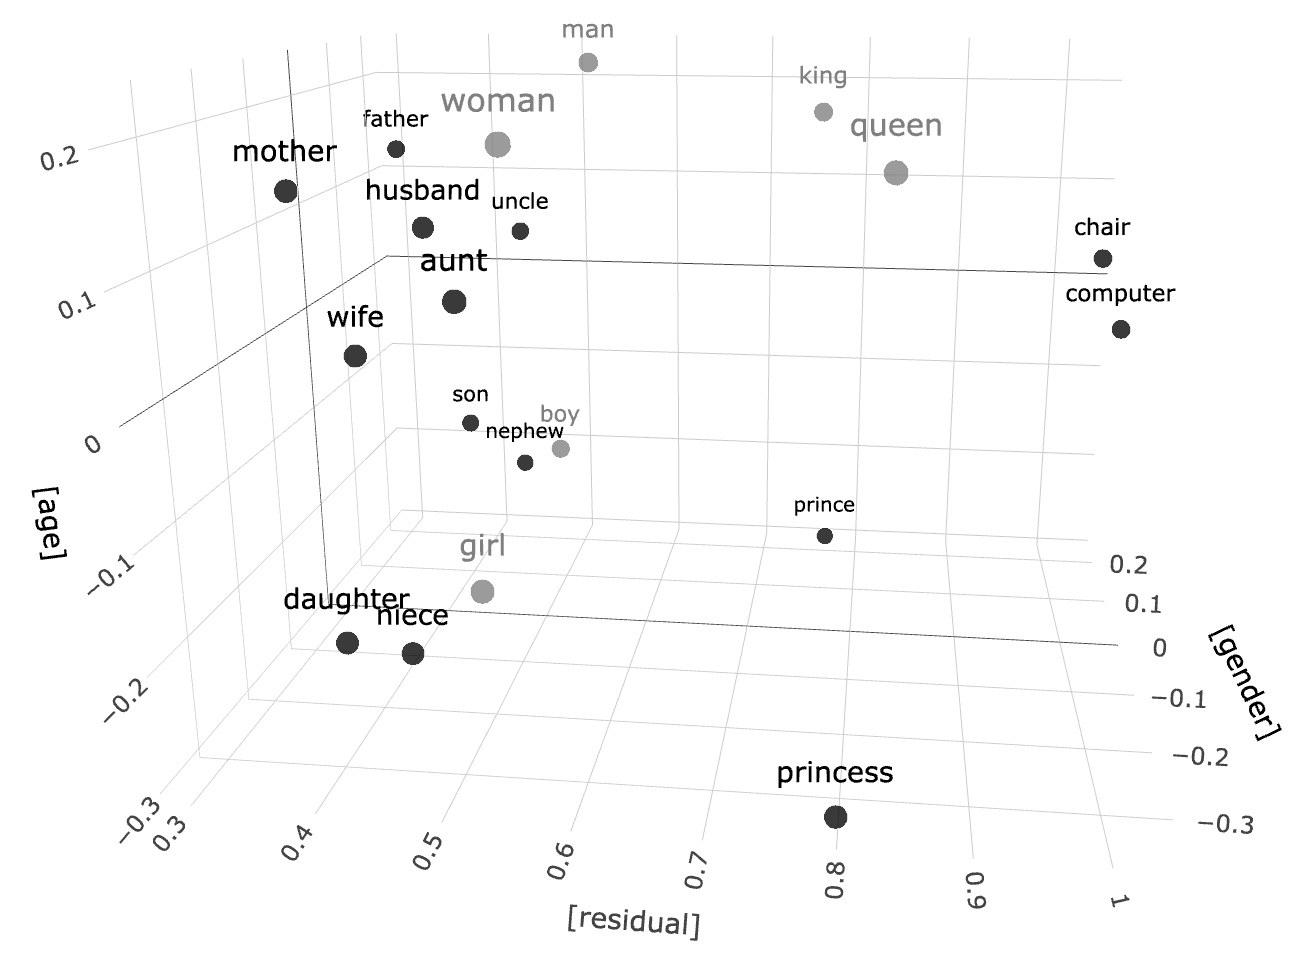 A simplified representation of a vector space. There are three dimensions: age, gender, and residual. Words are grouped in “semantic” clusters within that space. For example, “mother”, “father”, “husband” are close in one corner, while “chair” and “computer” are located in another corner.